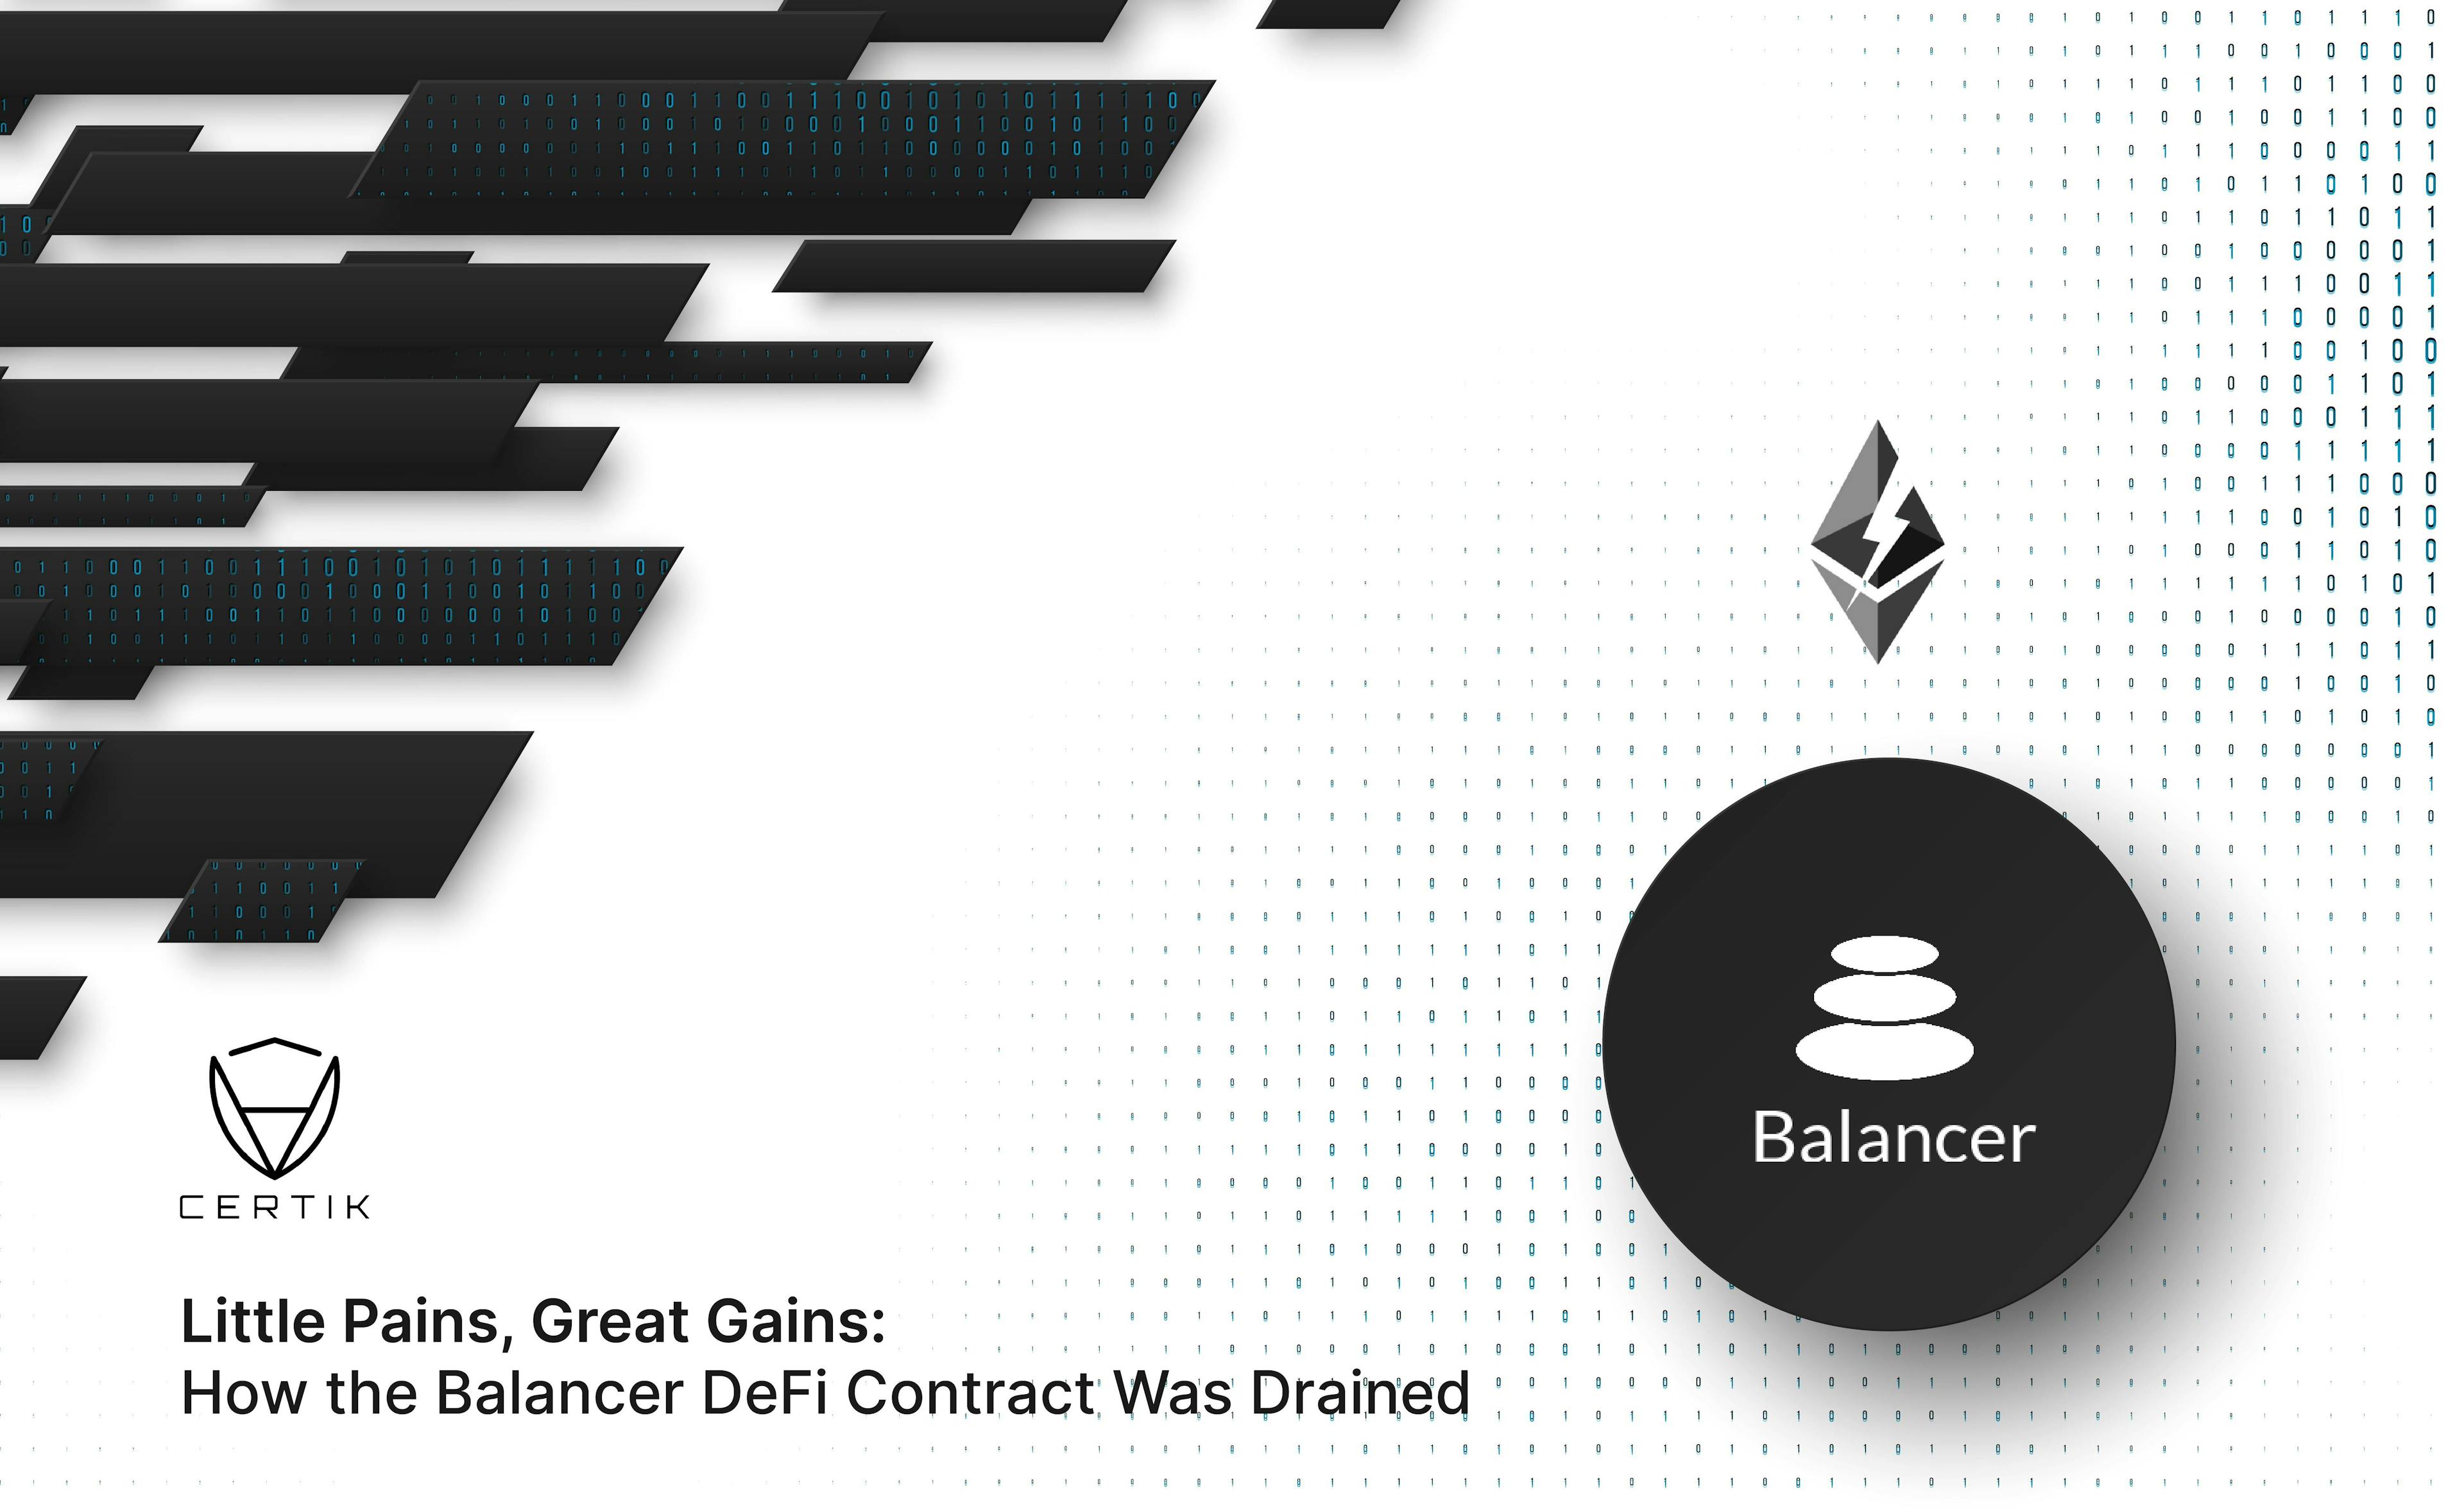 Little Pains, Great Gains: How the Balancer DeFi Contract Was Drained